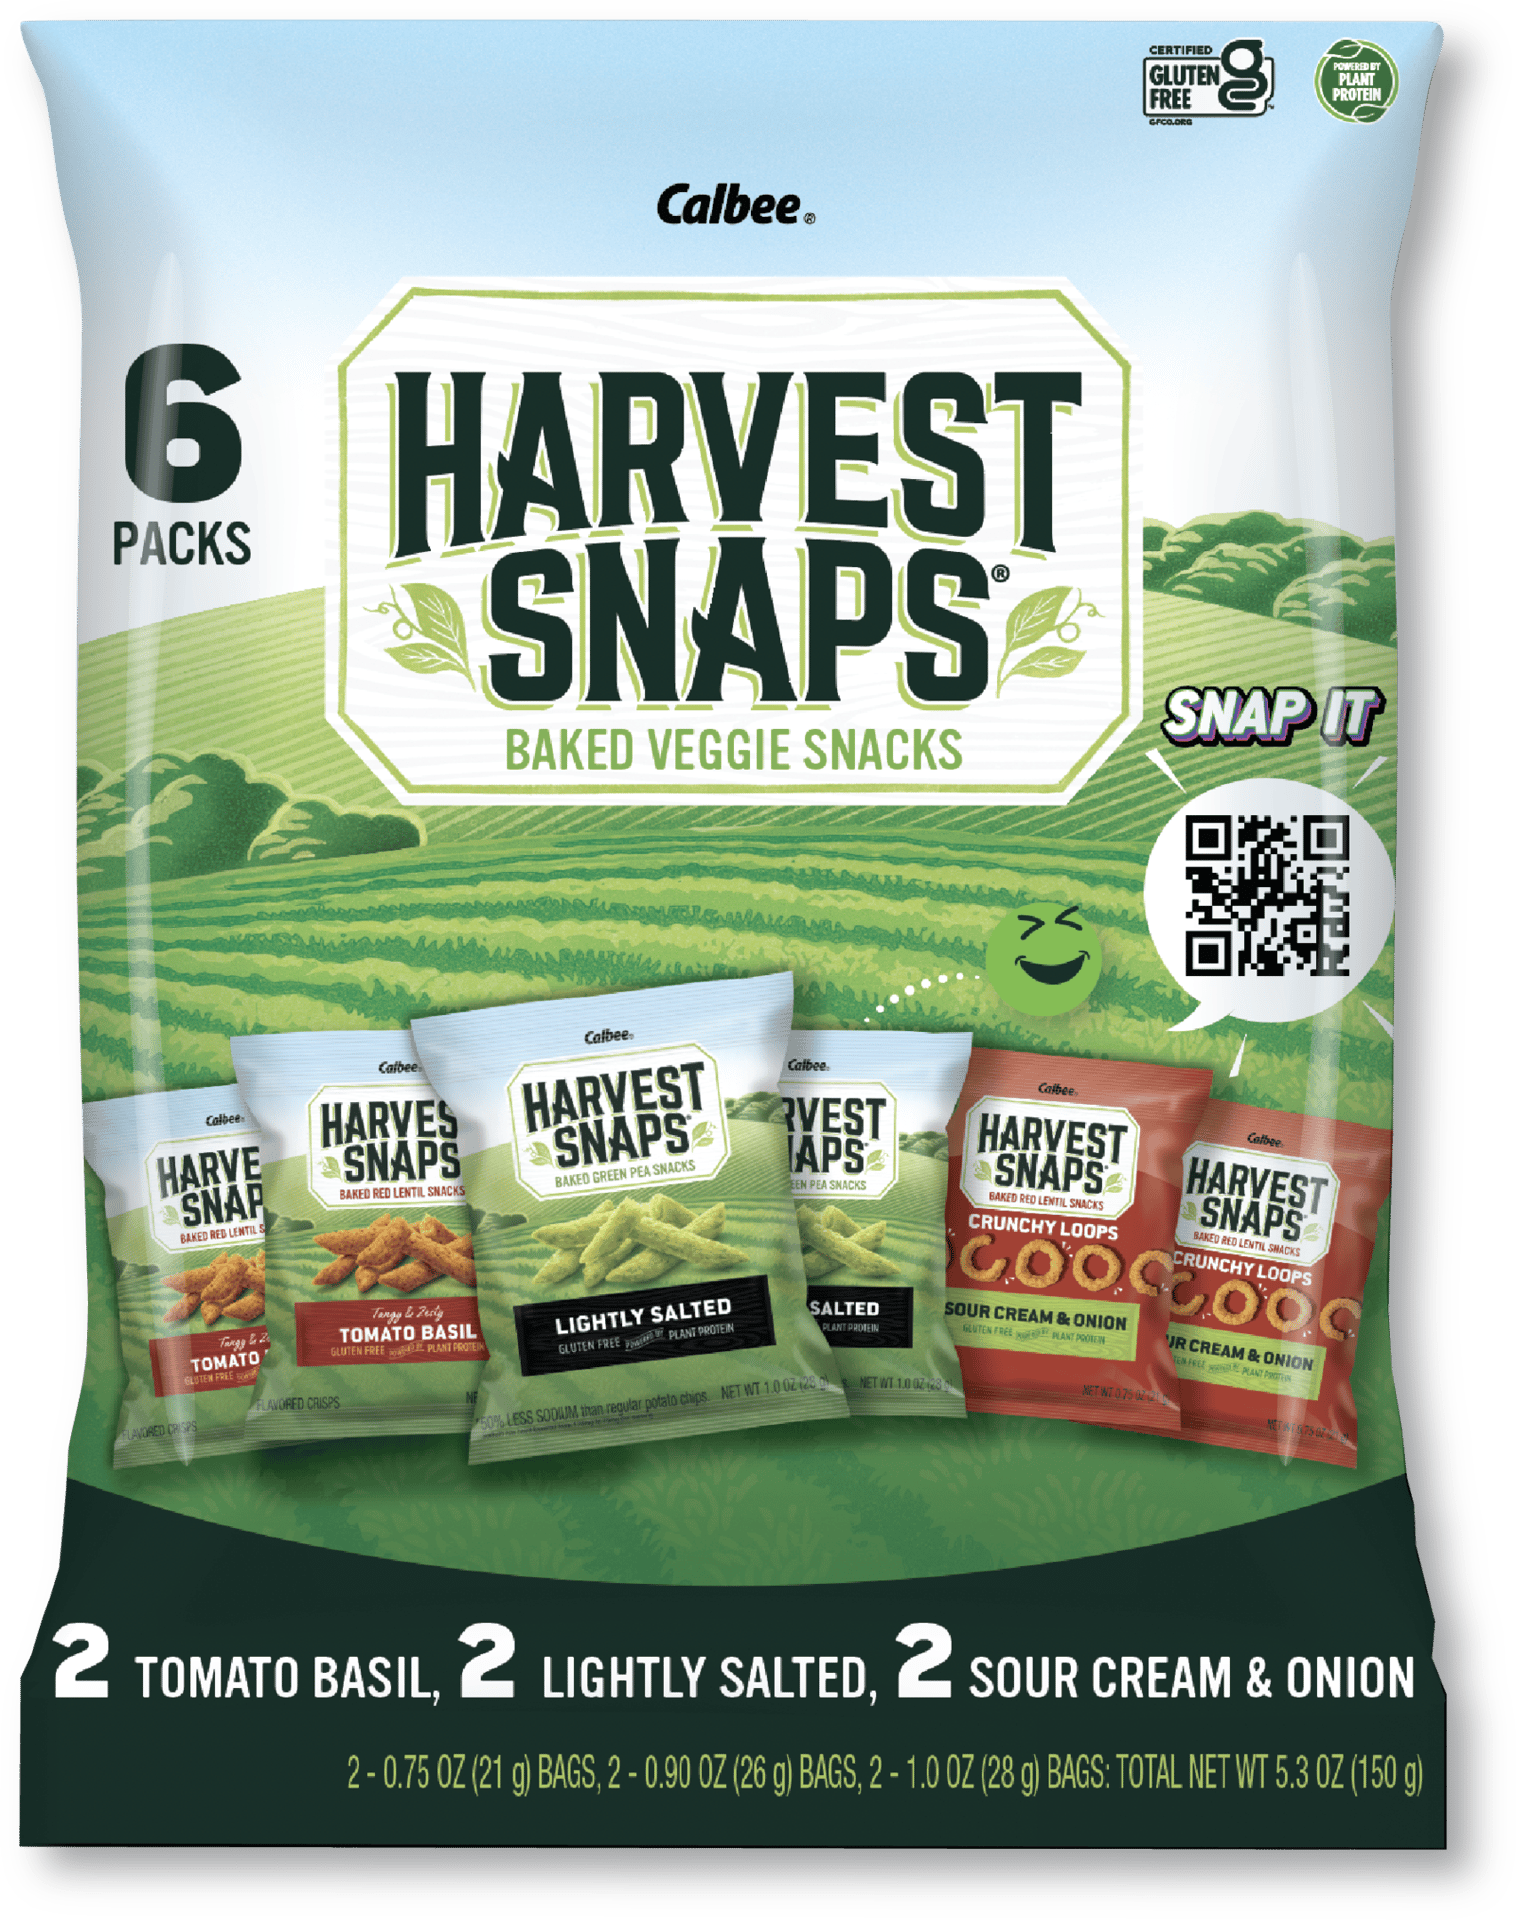 Is it Corn Free Calbee Harvest Snaps Lightly Salted Baked Green